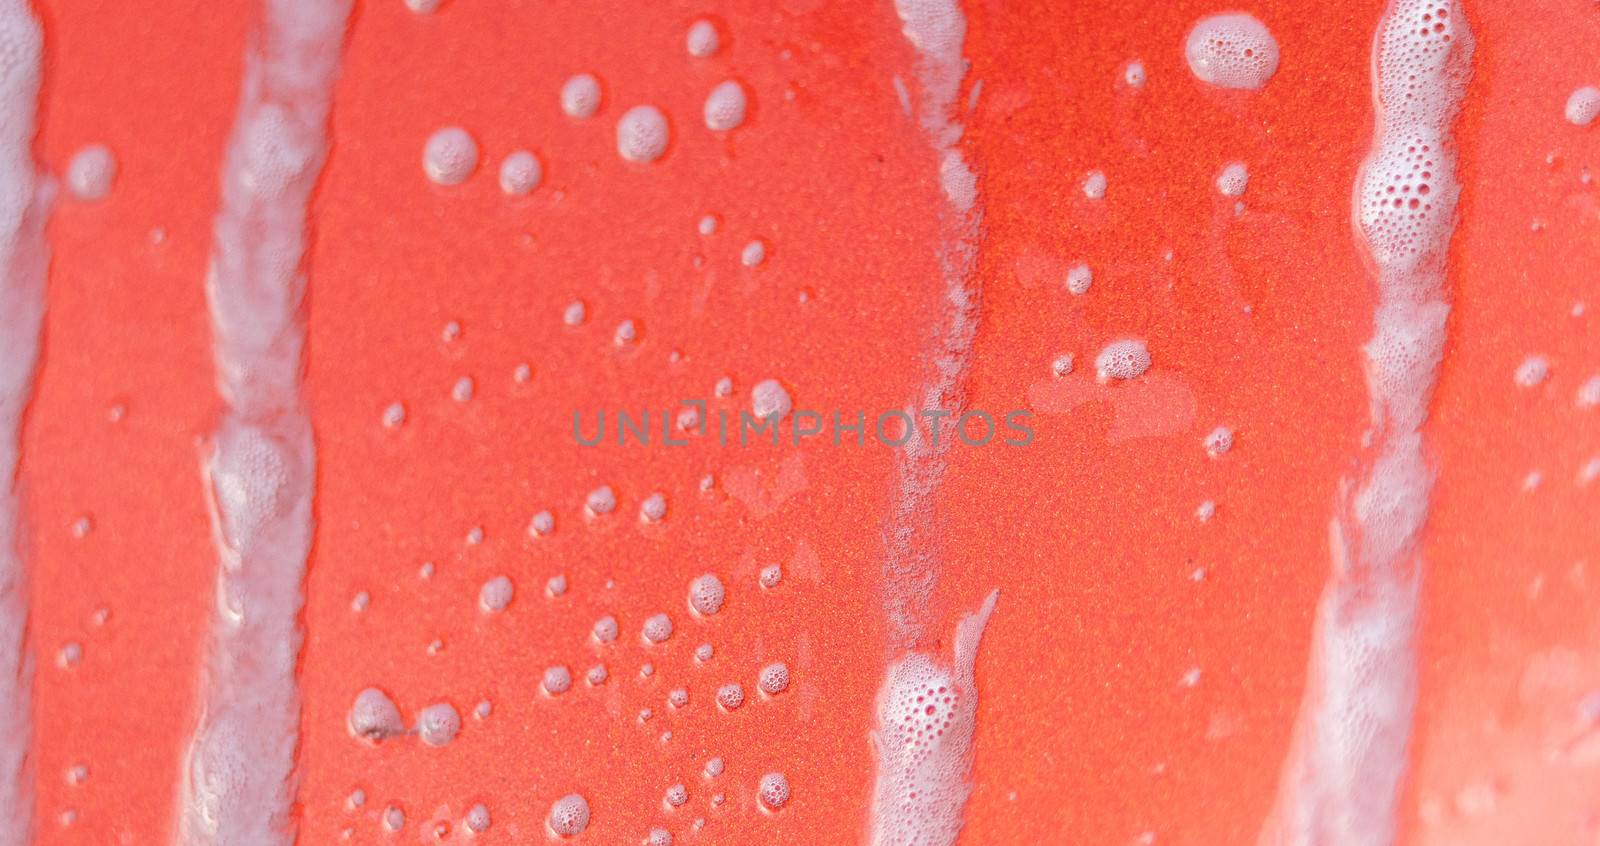 Bubble soap on the red car. Car washing concept. by TEERASAK